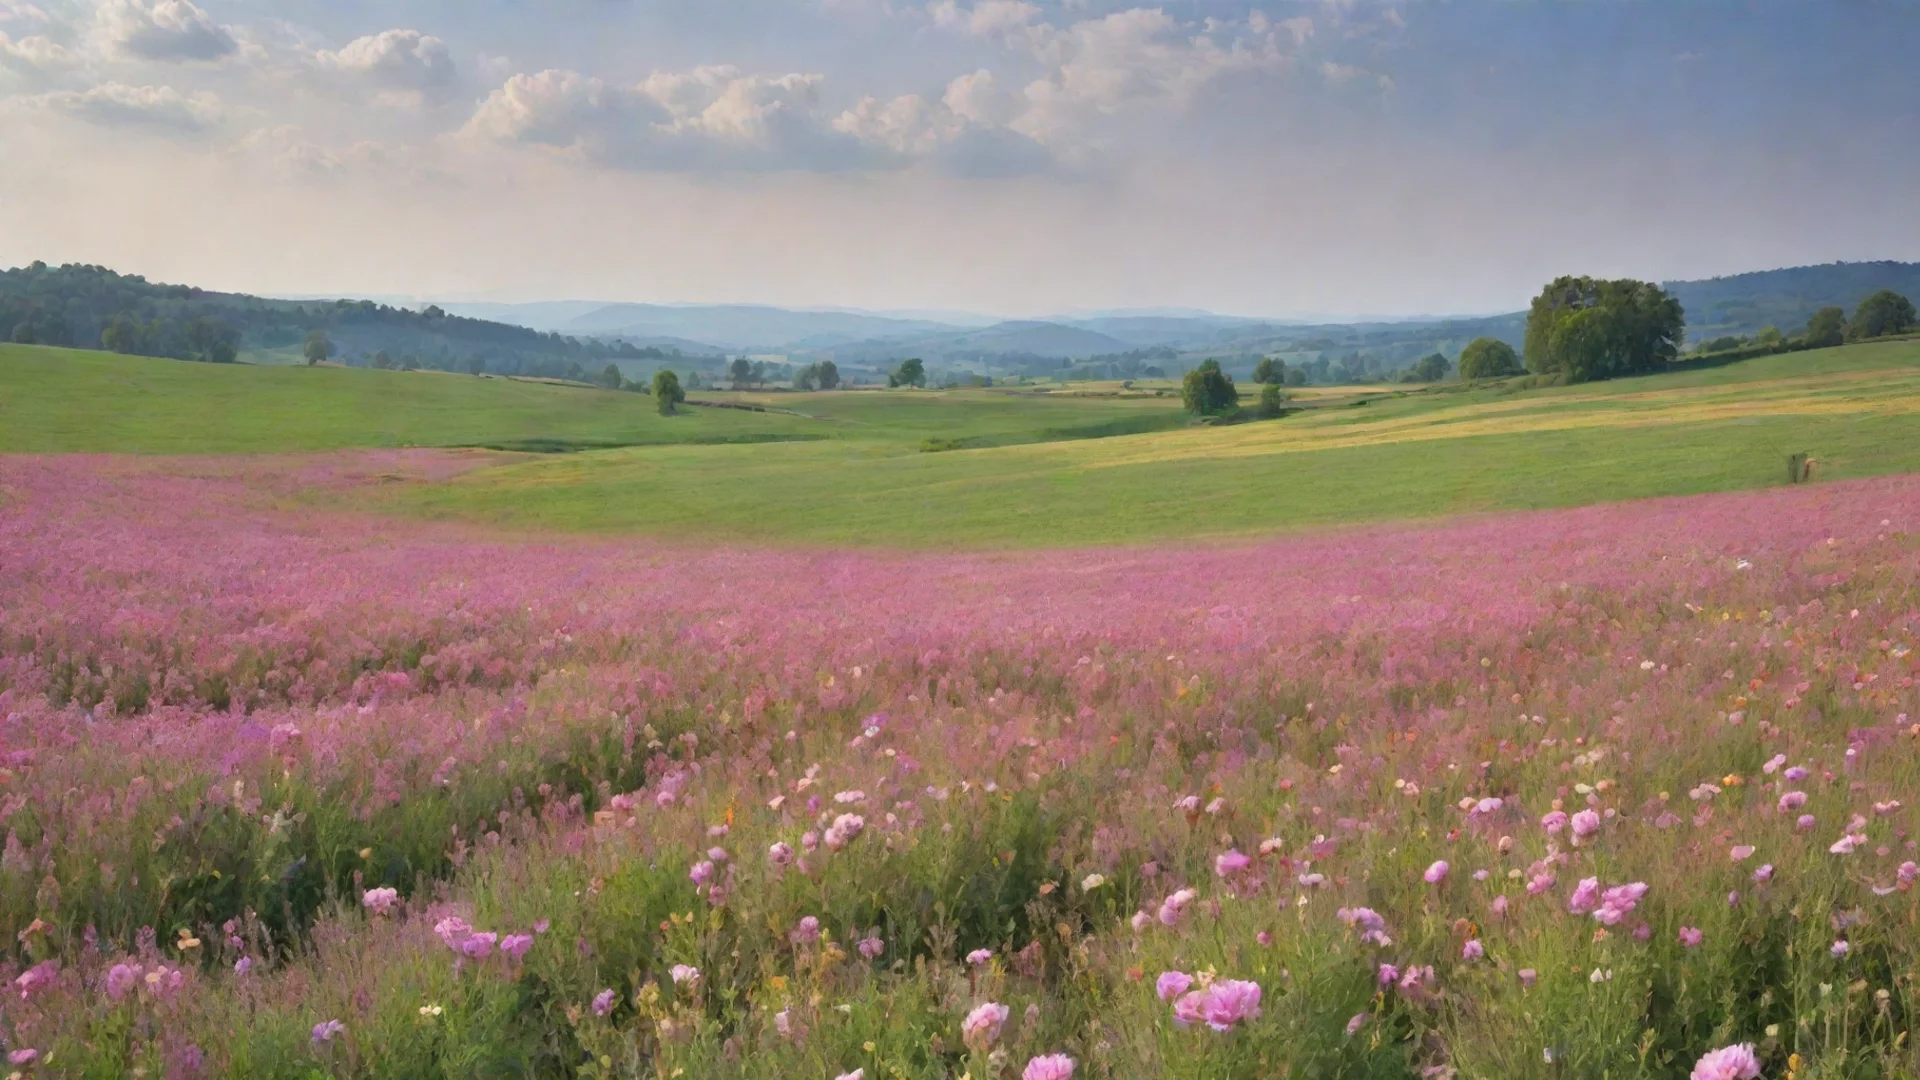 aiamazing sweeping landscape fields of flowers peaceful relaxing awesome portrait 2 wide